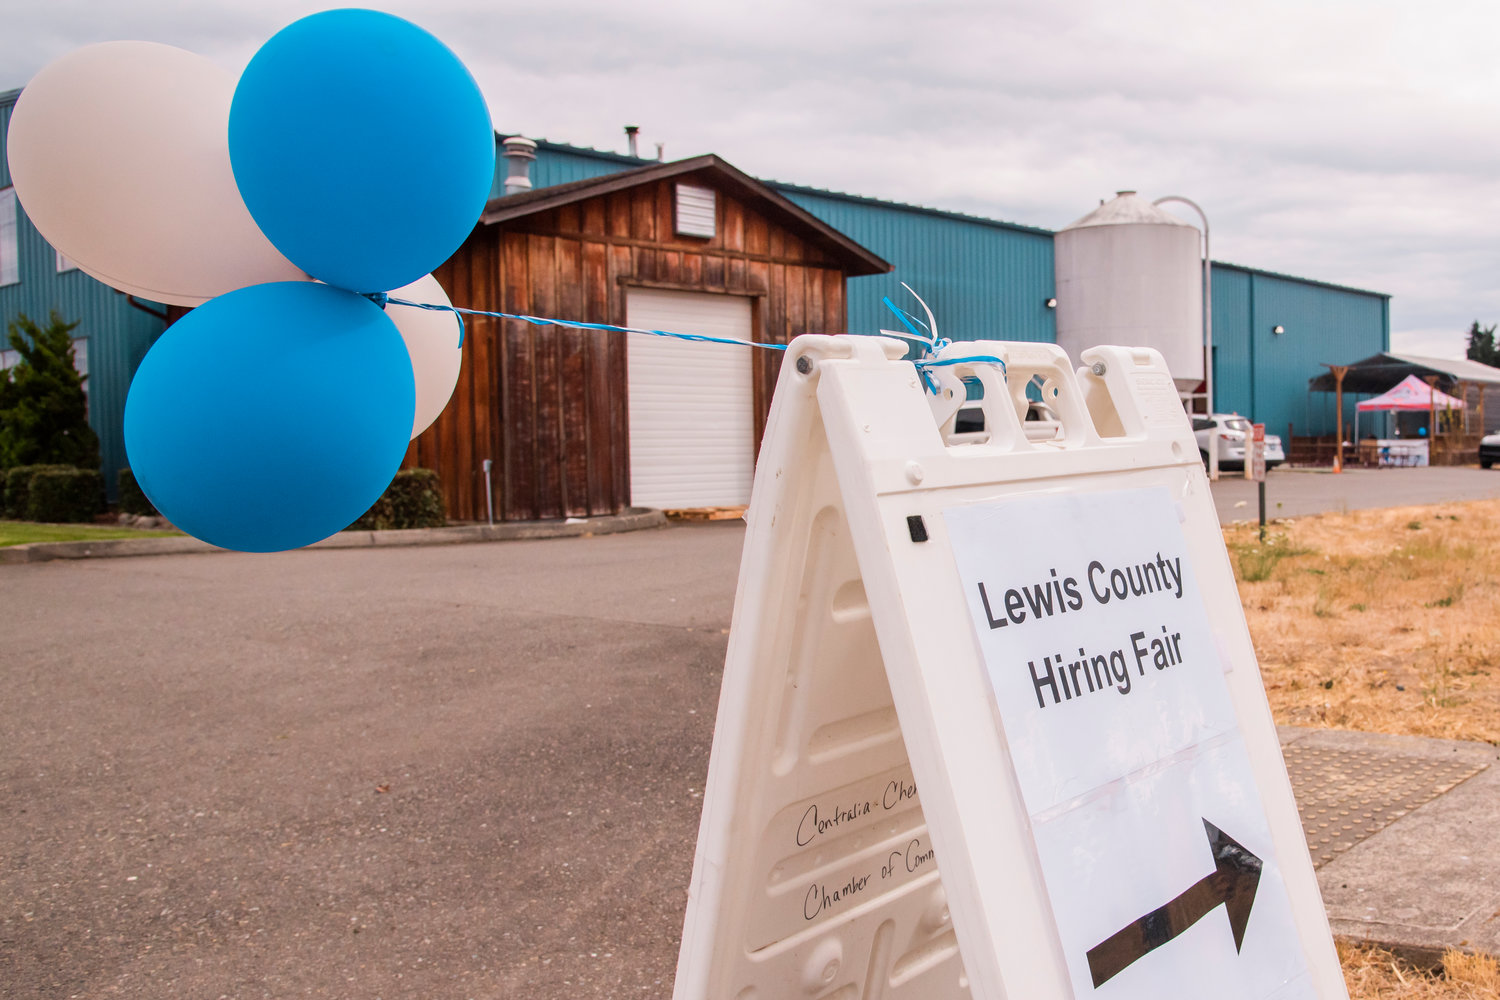 Balloons blow in the wind during a Lewis County Hiring Fair at Dick's Brewing in Centralia in September.